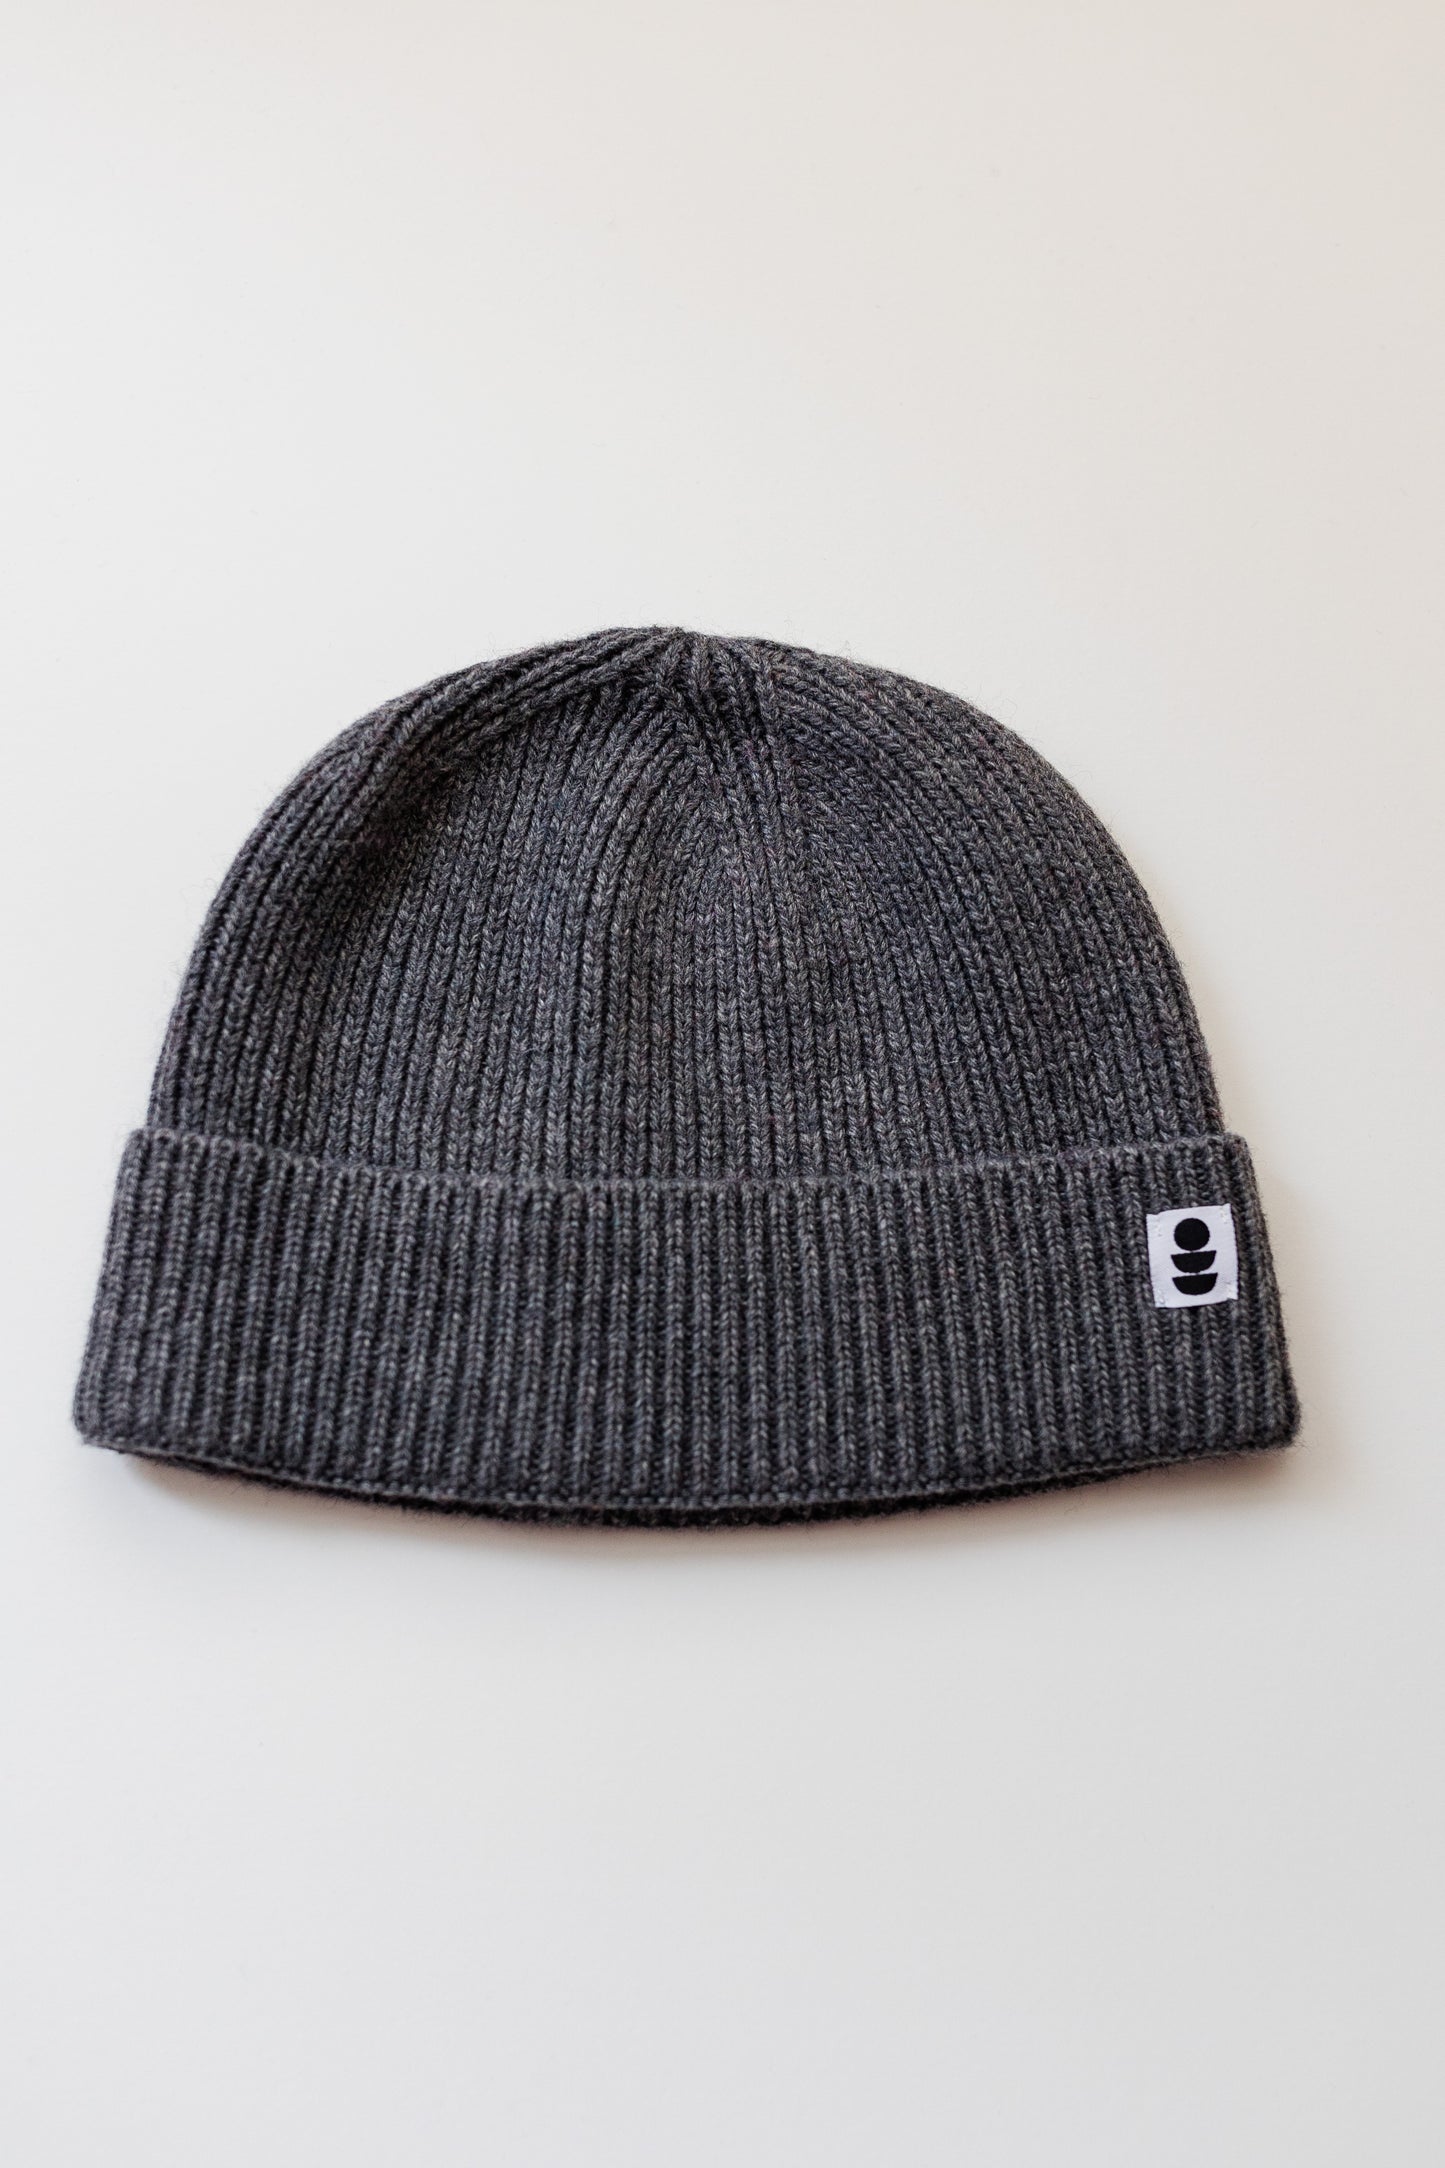 Light Weight Beanie made from 100% Recycled Yarn